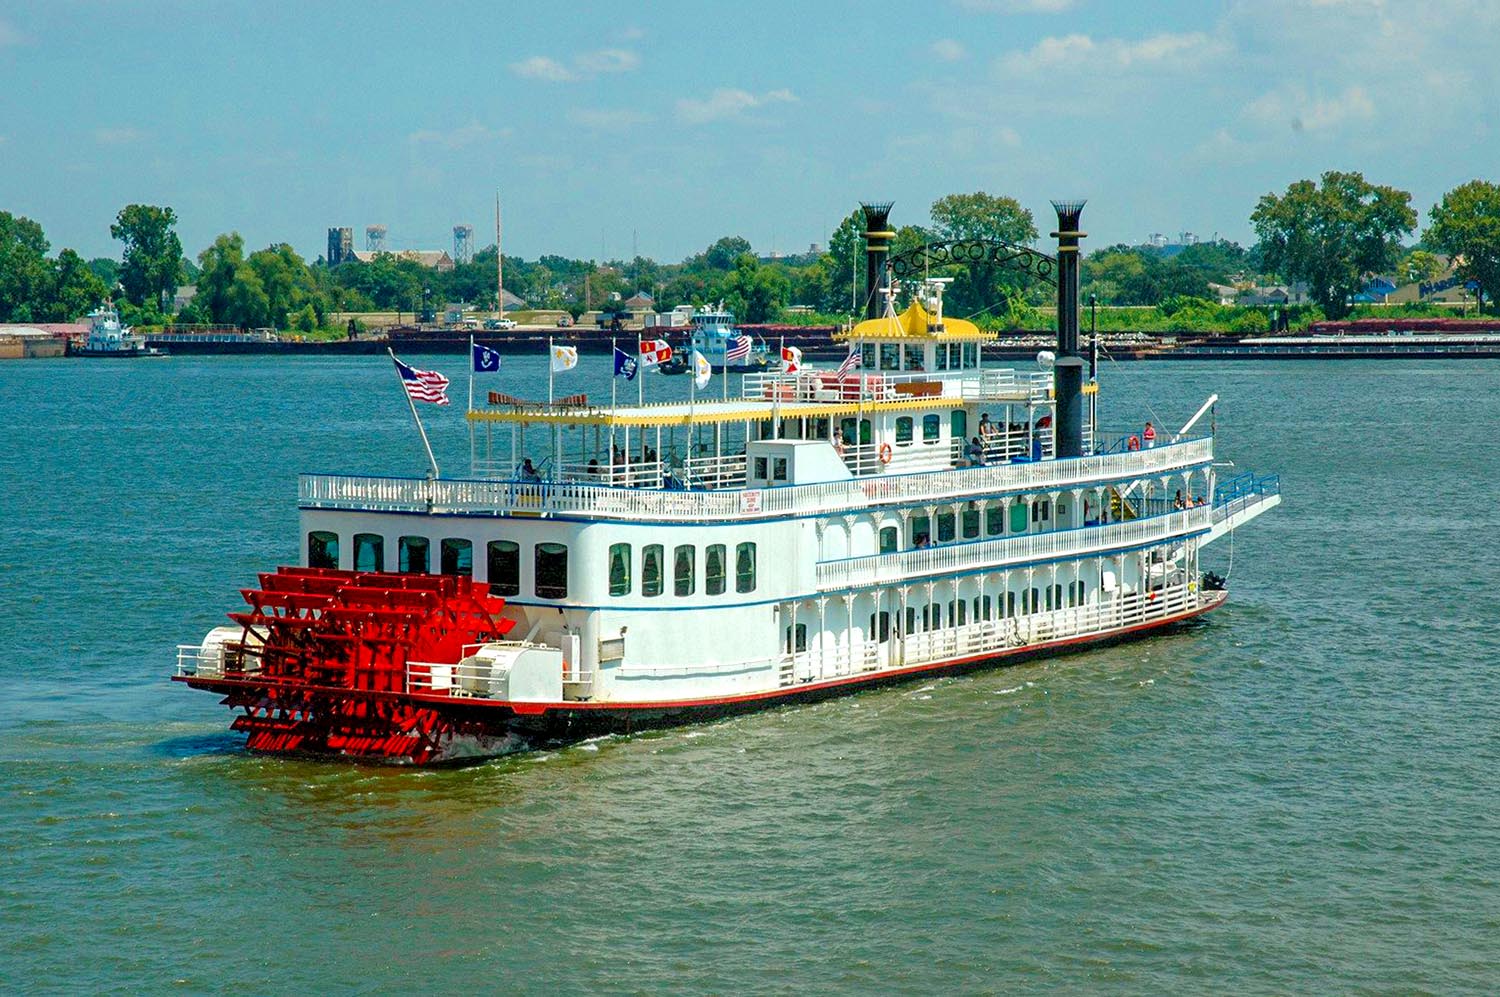 riverboat in the Mississippi river in Missouri